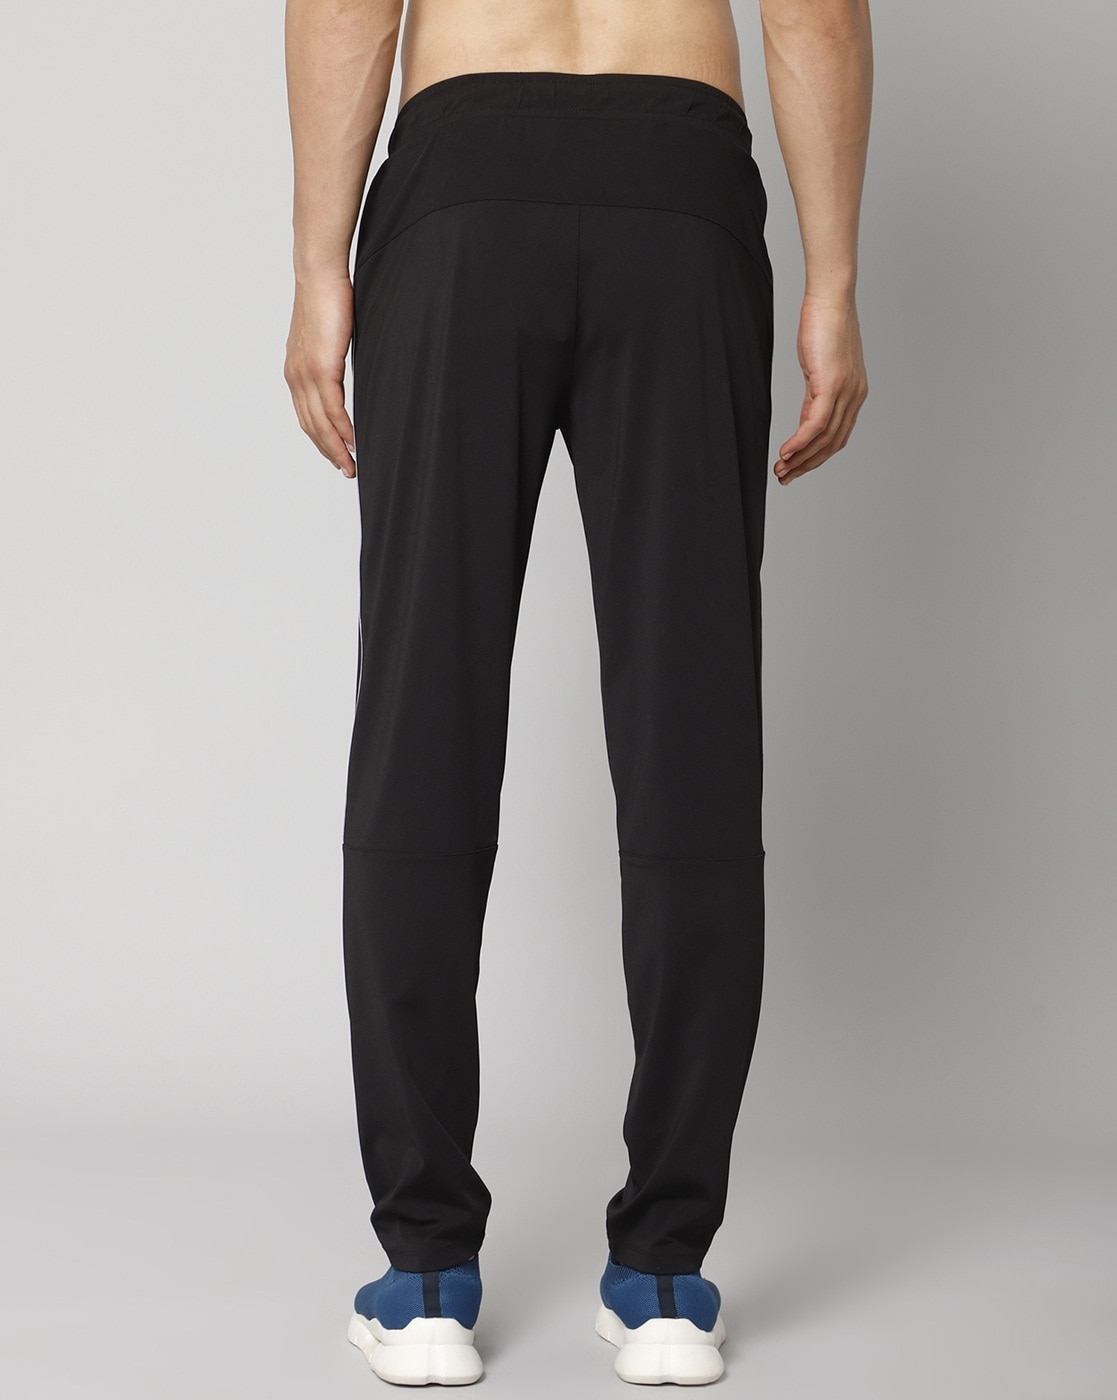 Men Performance Track Pants with Contrast Panels